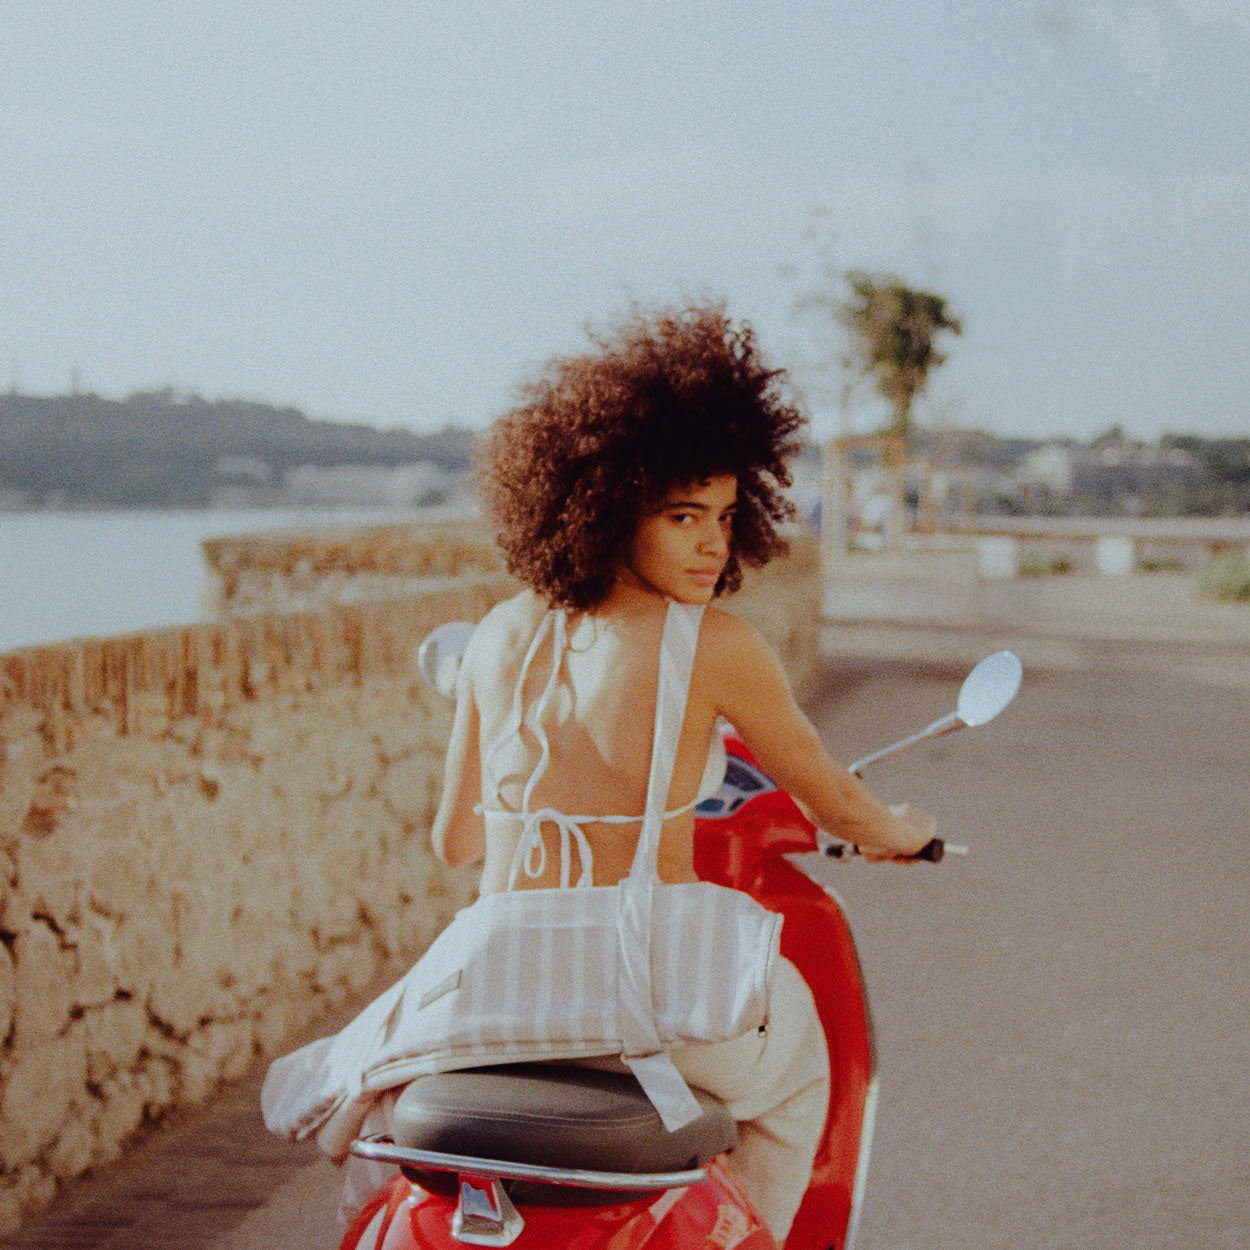 A women on a red moped with the beach in the background and a pool toy for adults strapped to her back.